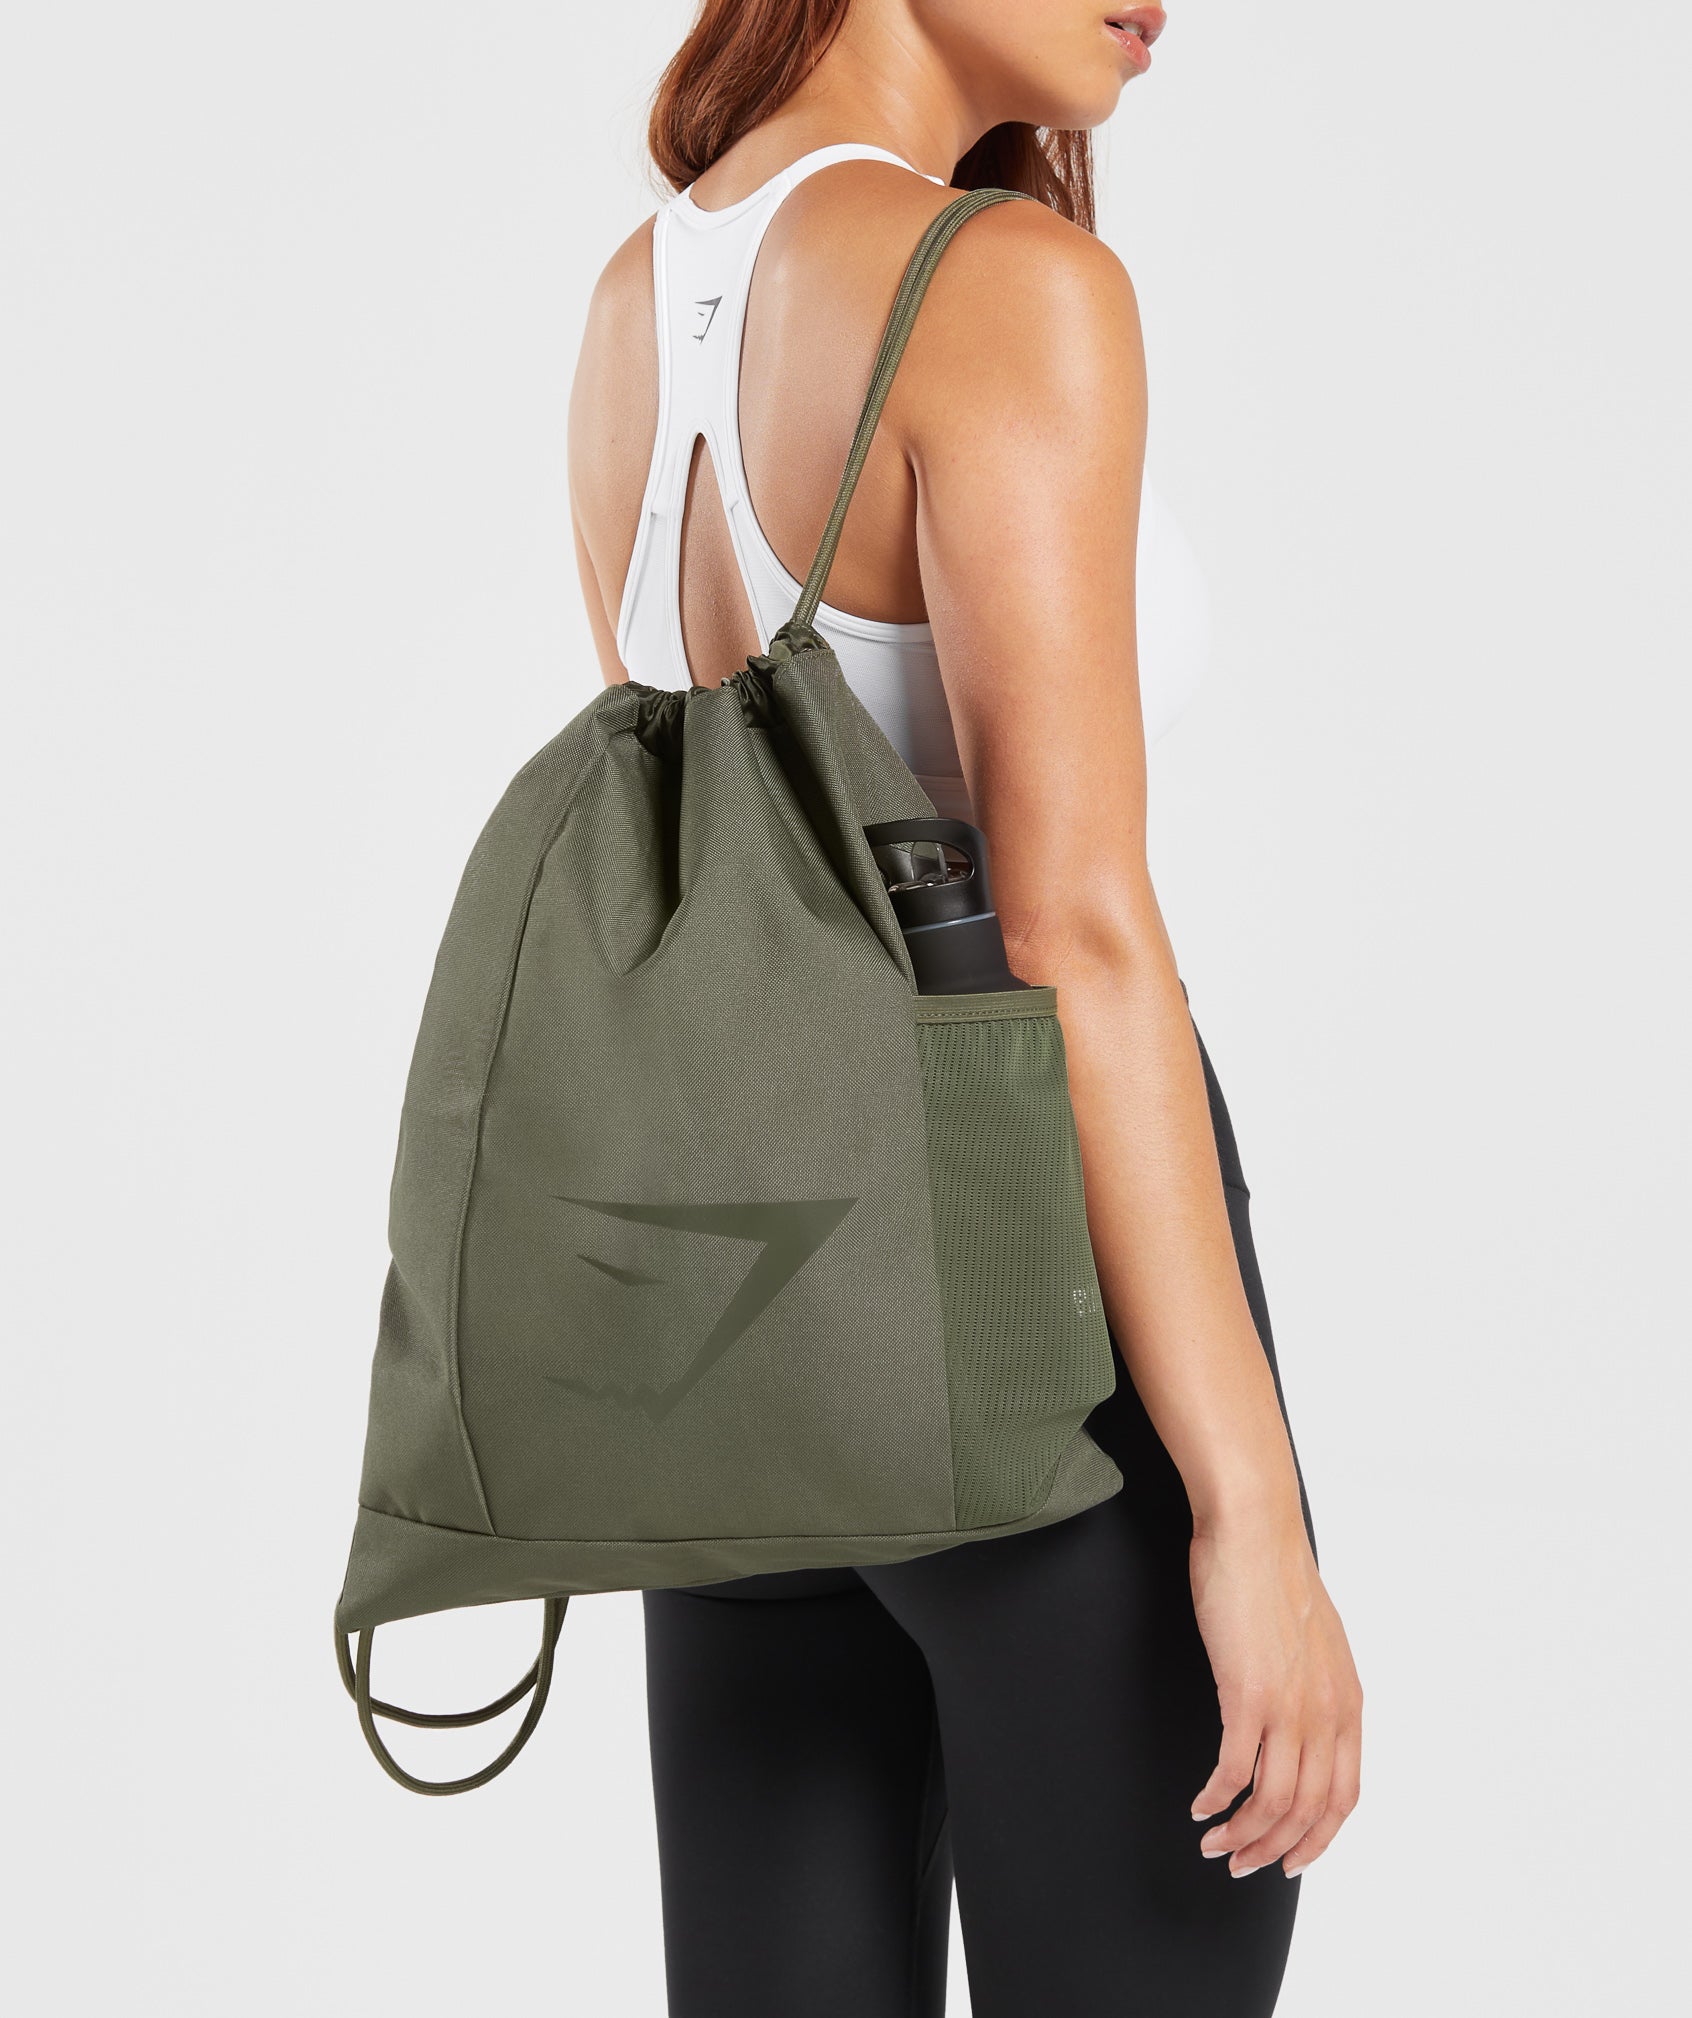 Sharkhead Gymsack in Core Olive - view 2